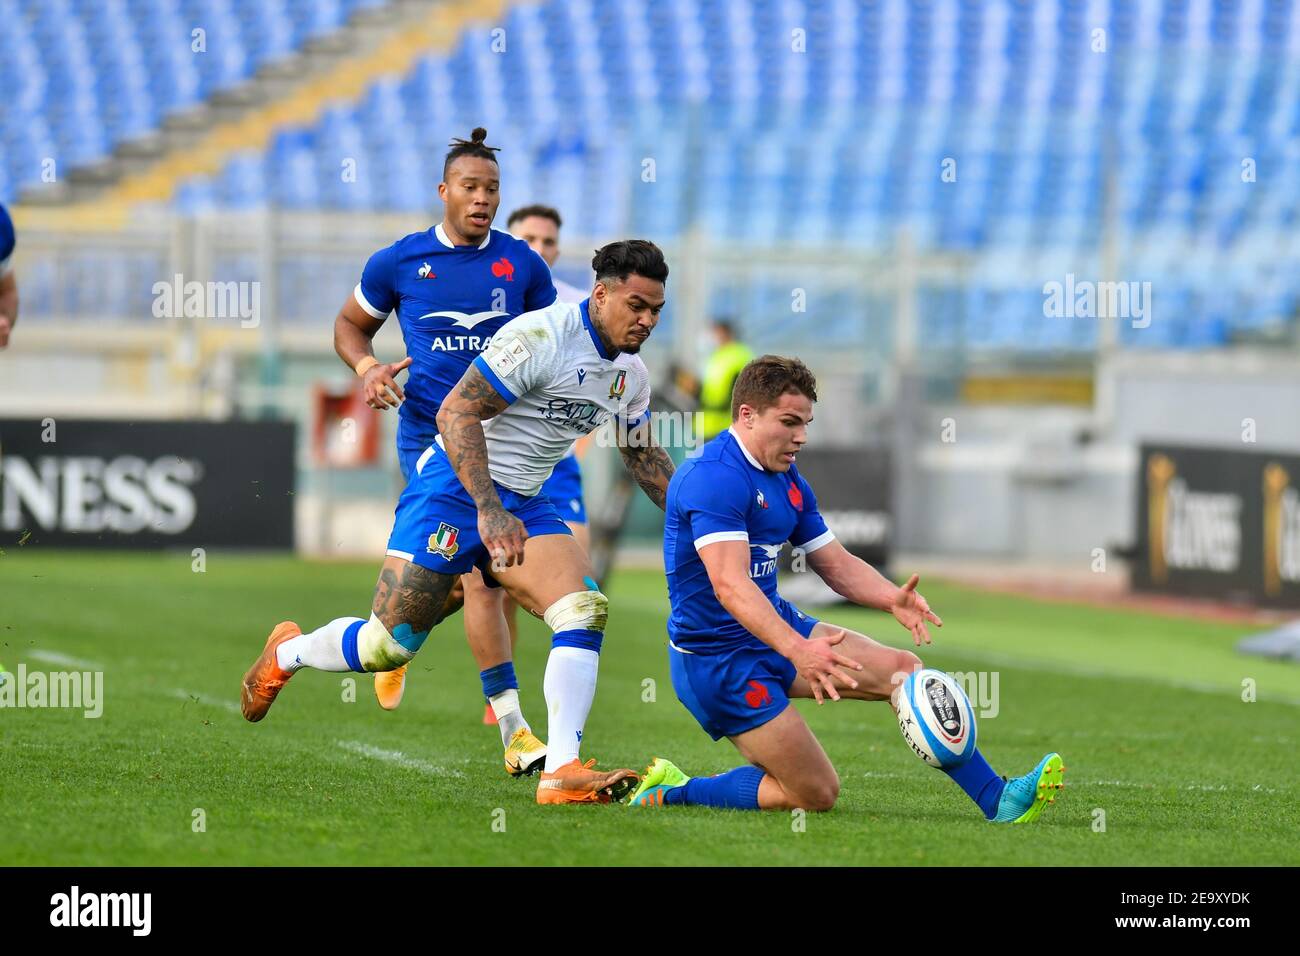 Rome, Italy. 6th Feb, 2021. Rome, Italy, Stadio Olimpico, February 06, 2021, Charles Ollivon (France) and Montanna Ioane (Italy) during Italy vs France - Rugby Six Nations match Credit: Carlo Cappuccitti/LPS/ZUMA Wire/Alamy Live News Stock Photo